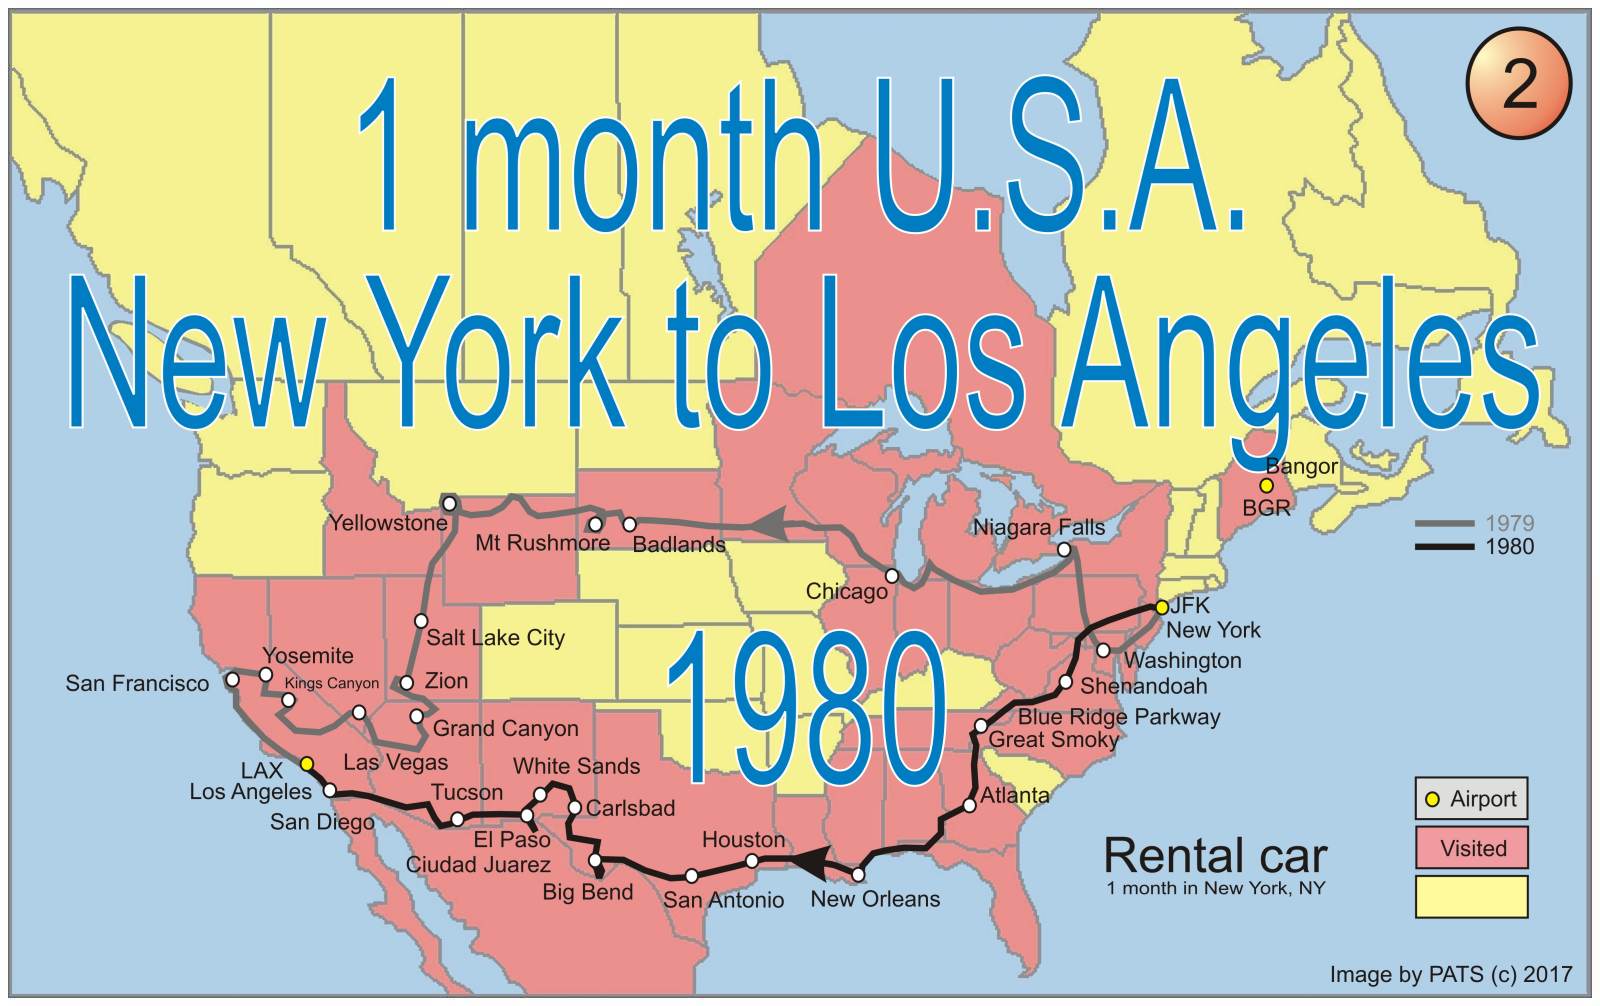 1980 - 1 month - New York to Los Angeles